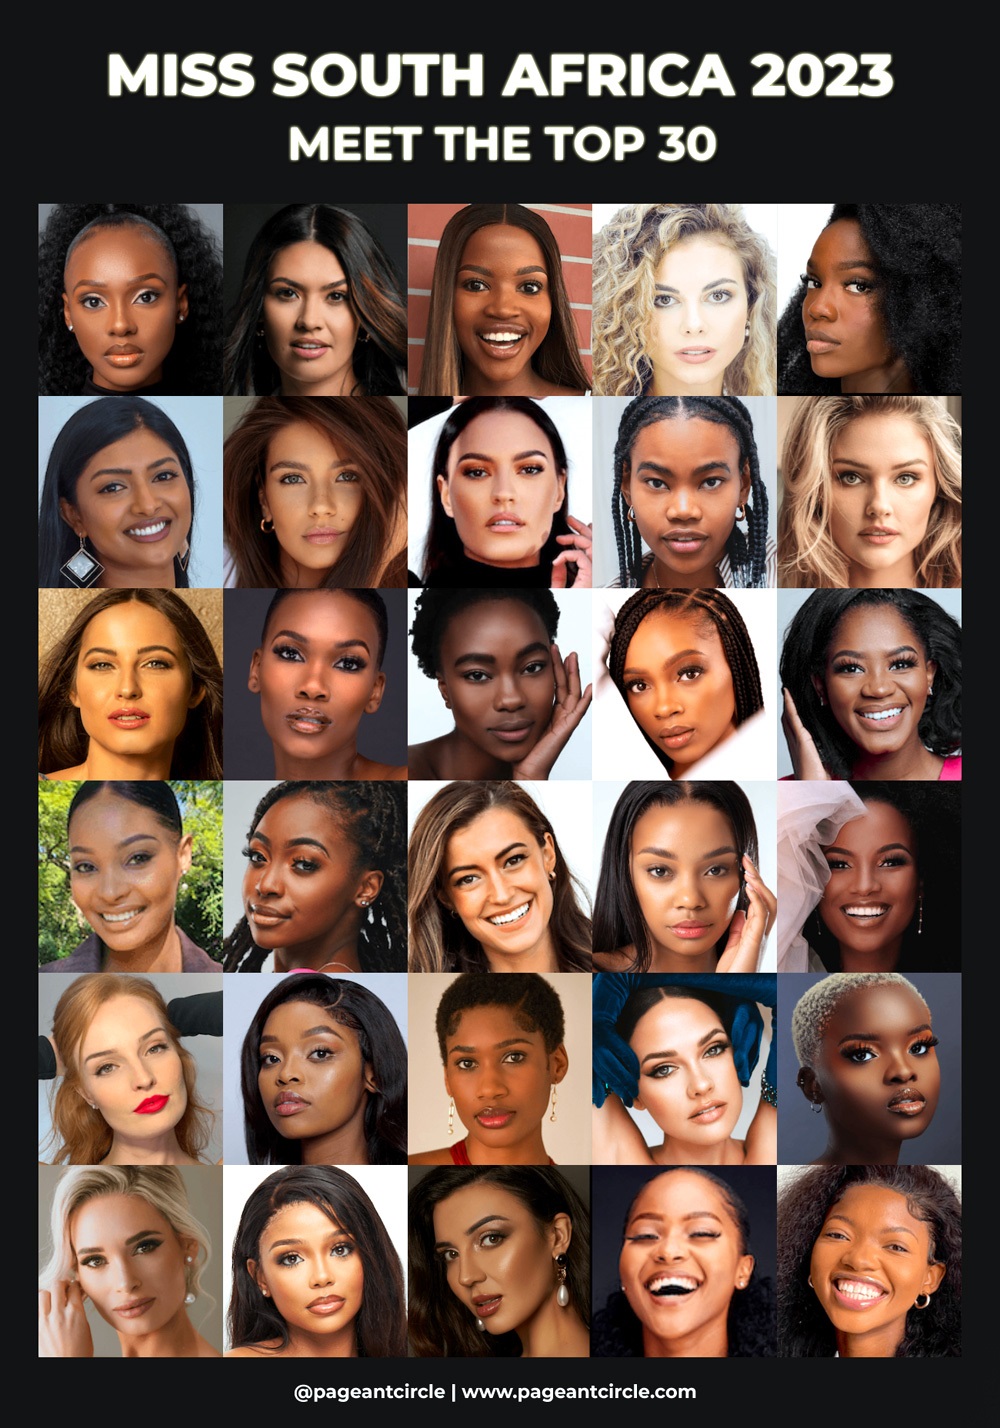 Miss South Africa 2023 Top 30 contestants officially revealed